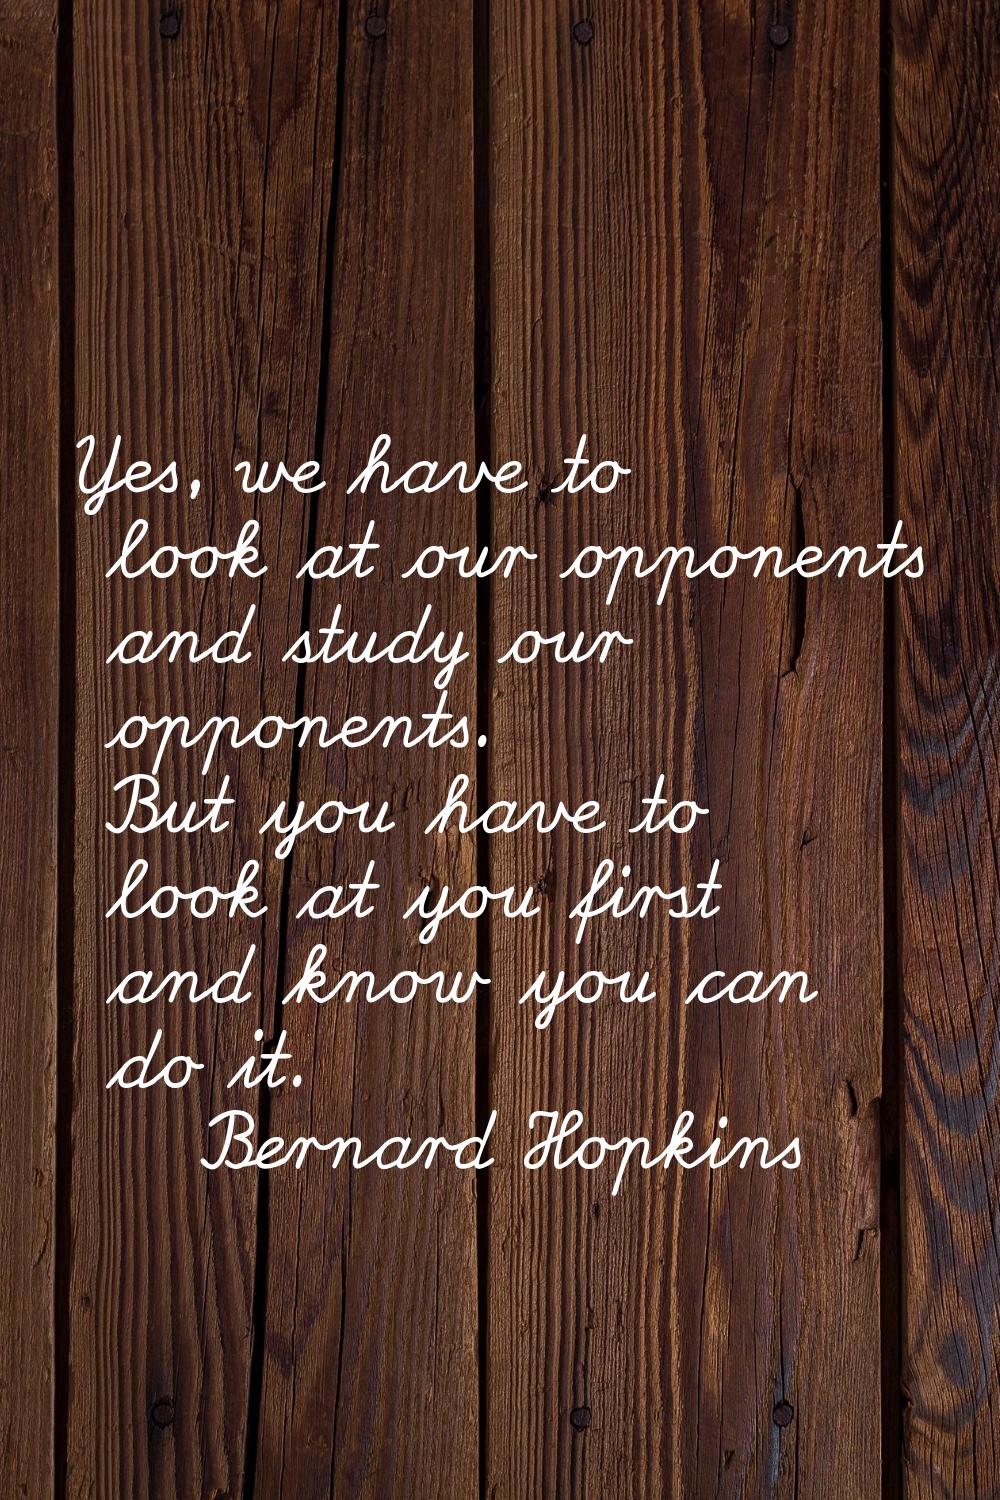 Yes, we have to look at our opponents and study our opponents. But you have to look at you first an